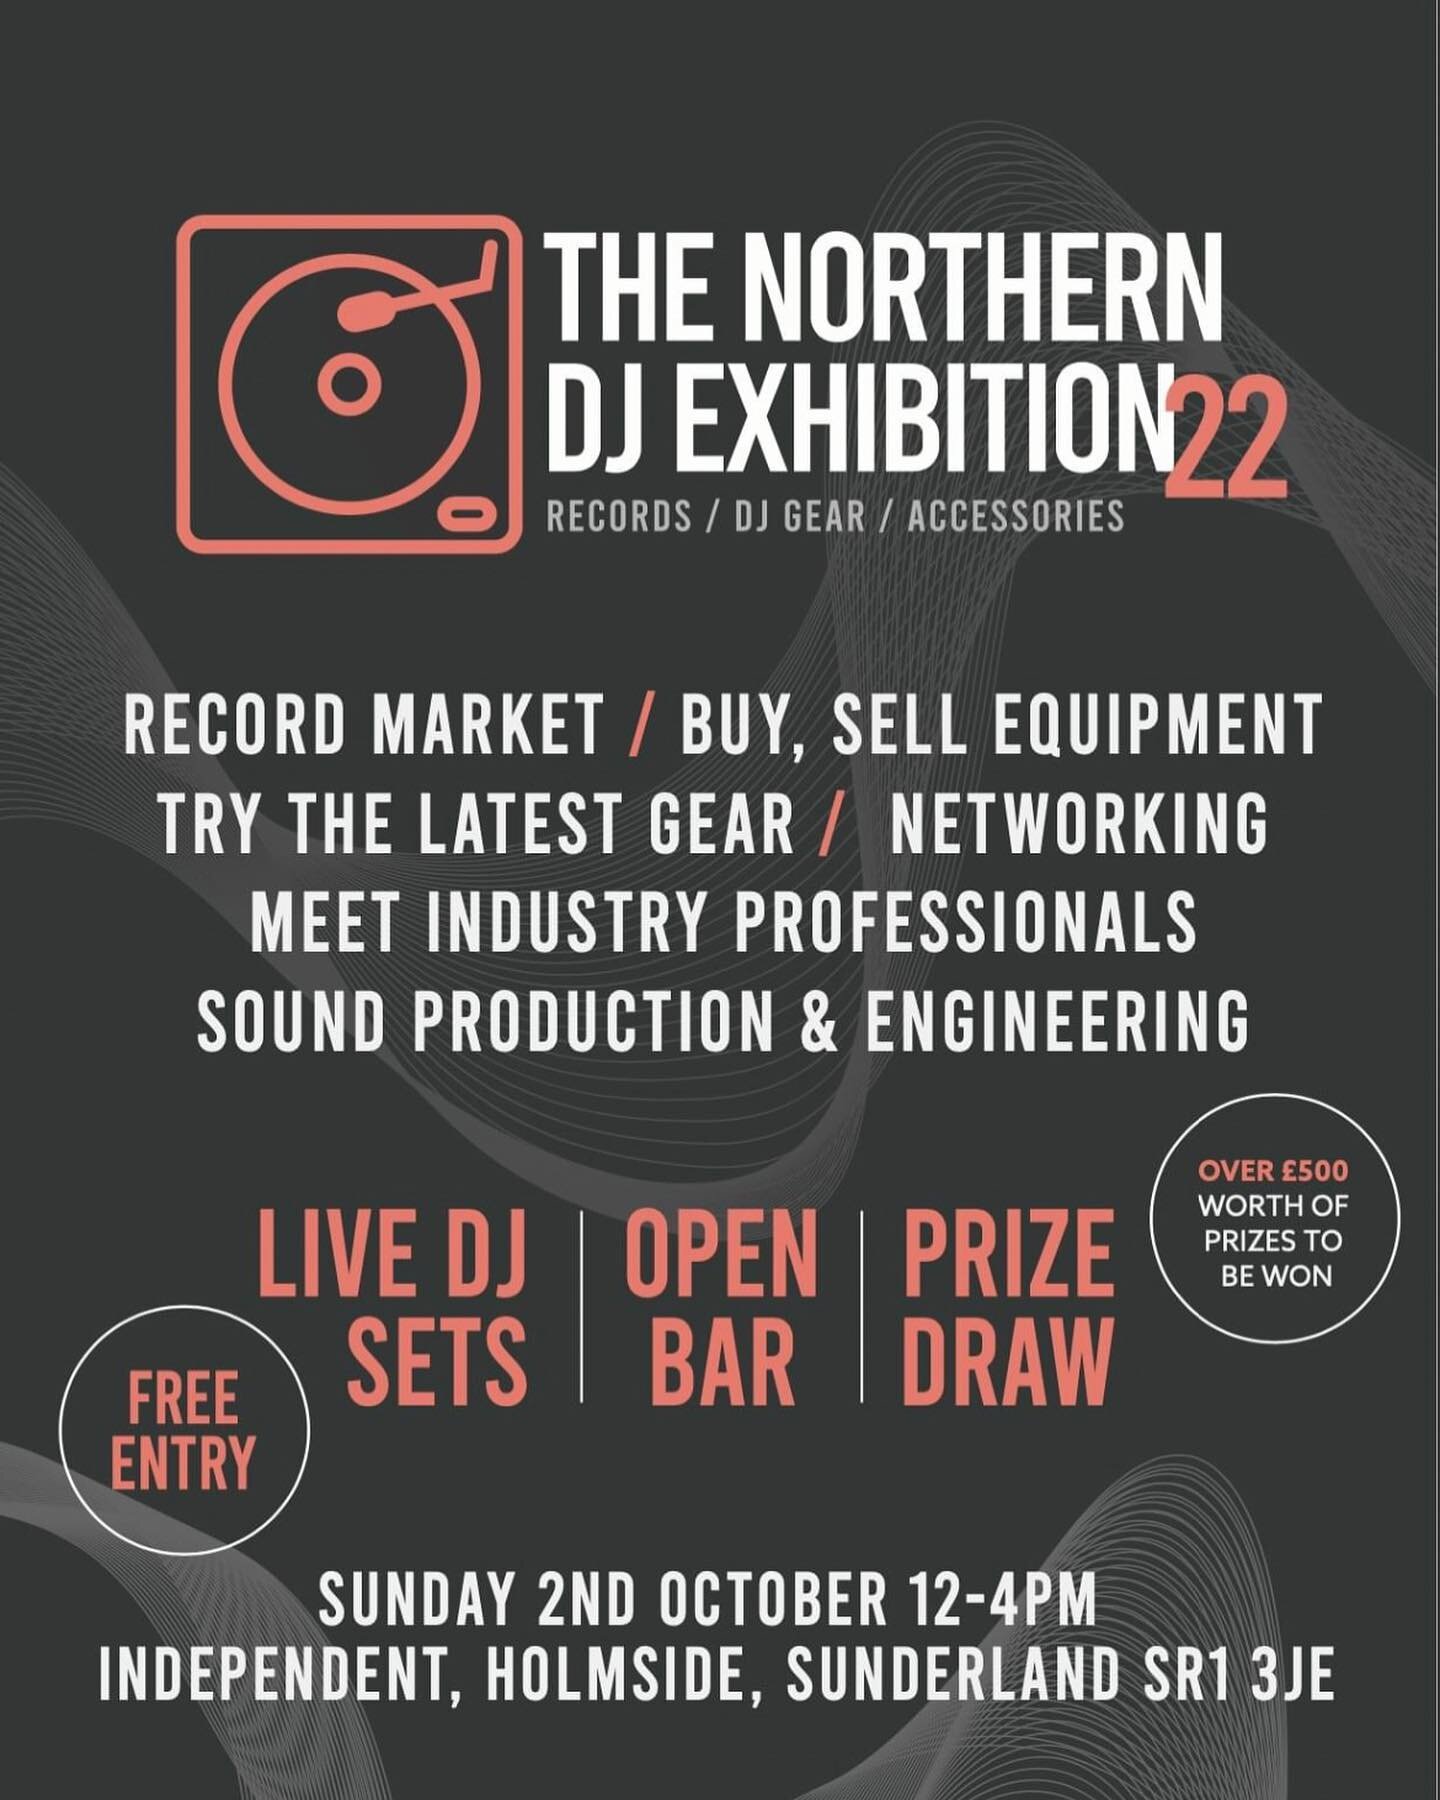 We will be displaying some repainted cabinets and previous turntables we have worked on at The Northern DJ Exhibition tomorrow at @weareindependent 

Including the maddest repaint we have ever done 👀👀👀

Hope to see some of you guys there!

#techni